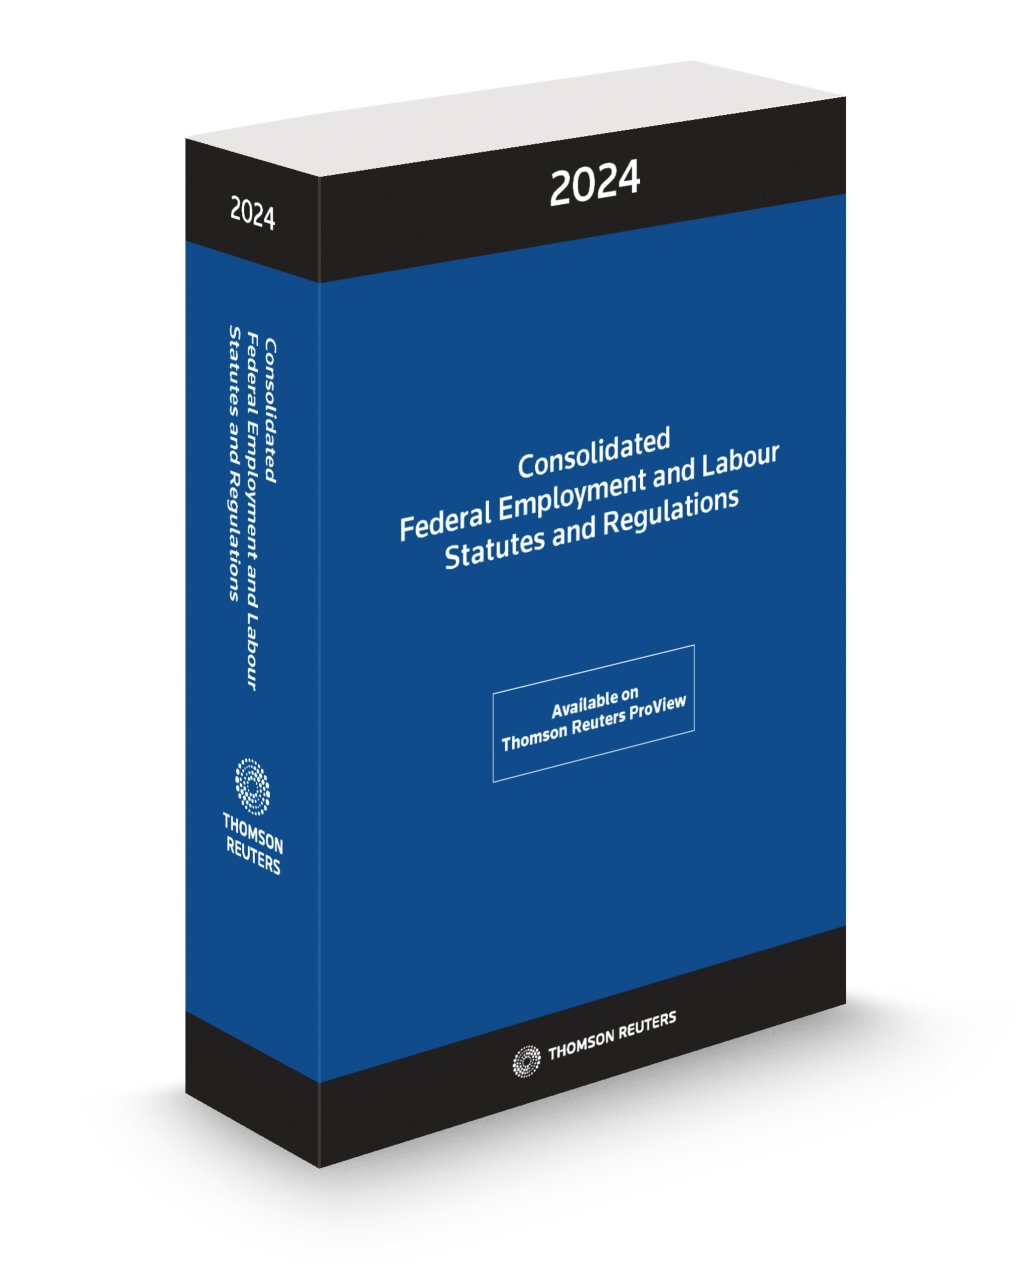 Front cover image of the Consolidated Federal Employment and Labour Statutes and Regulations 2024.